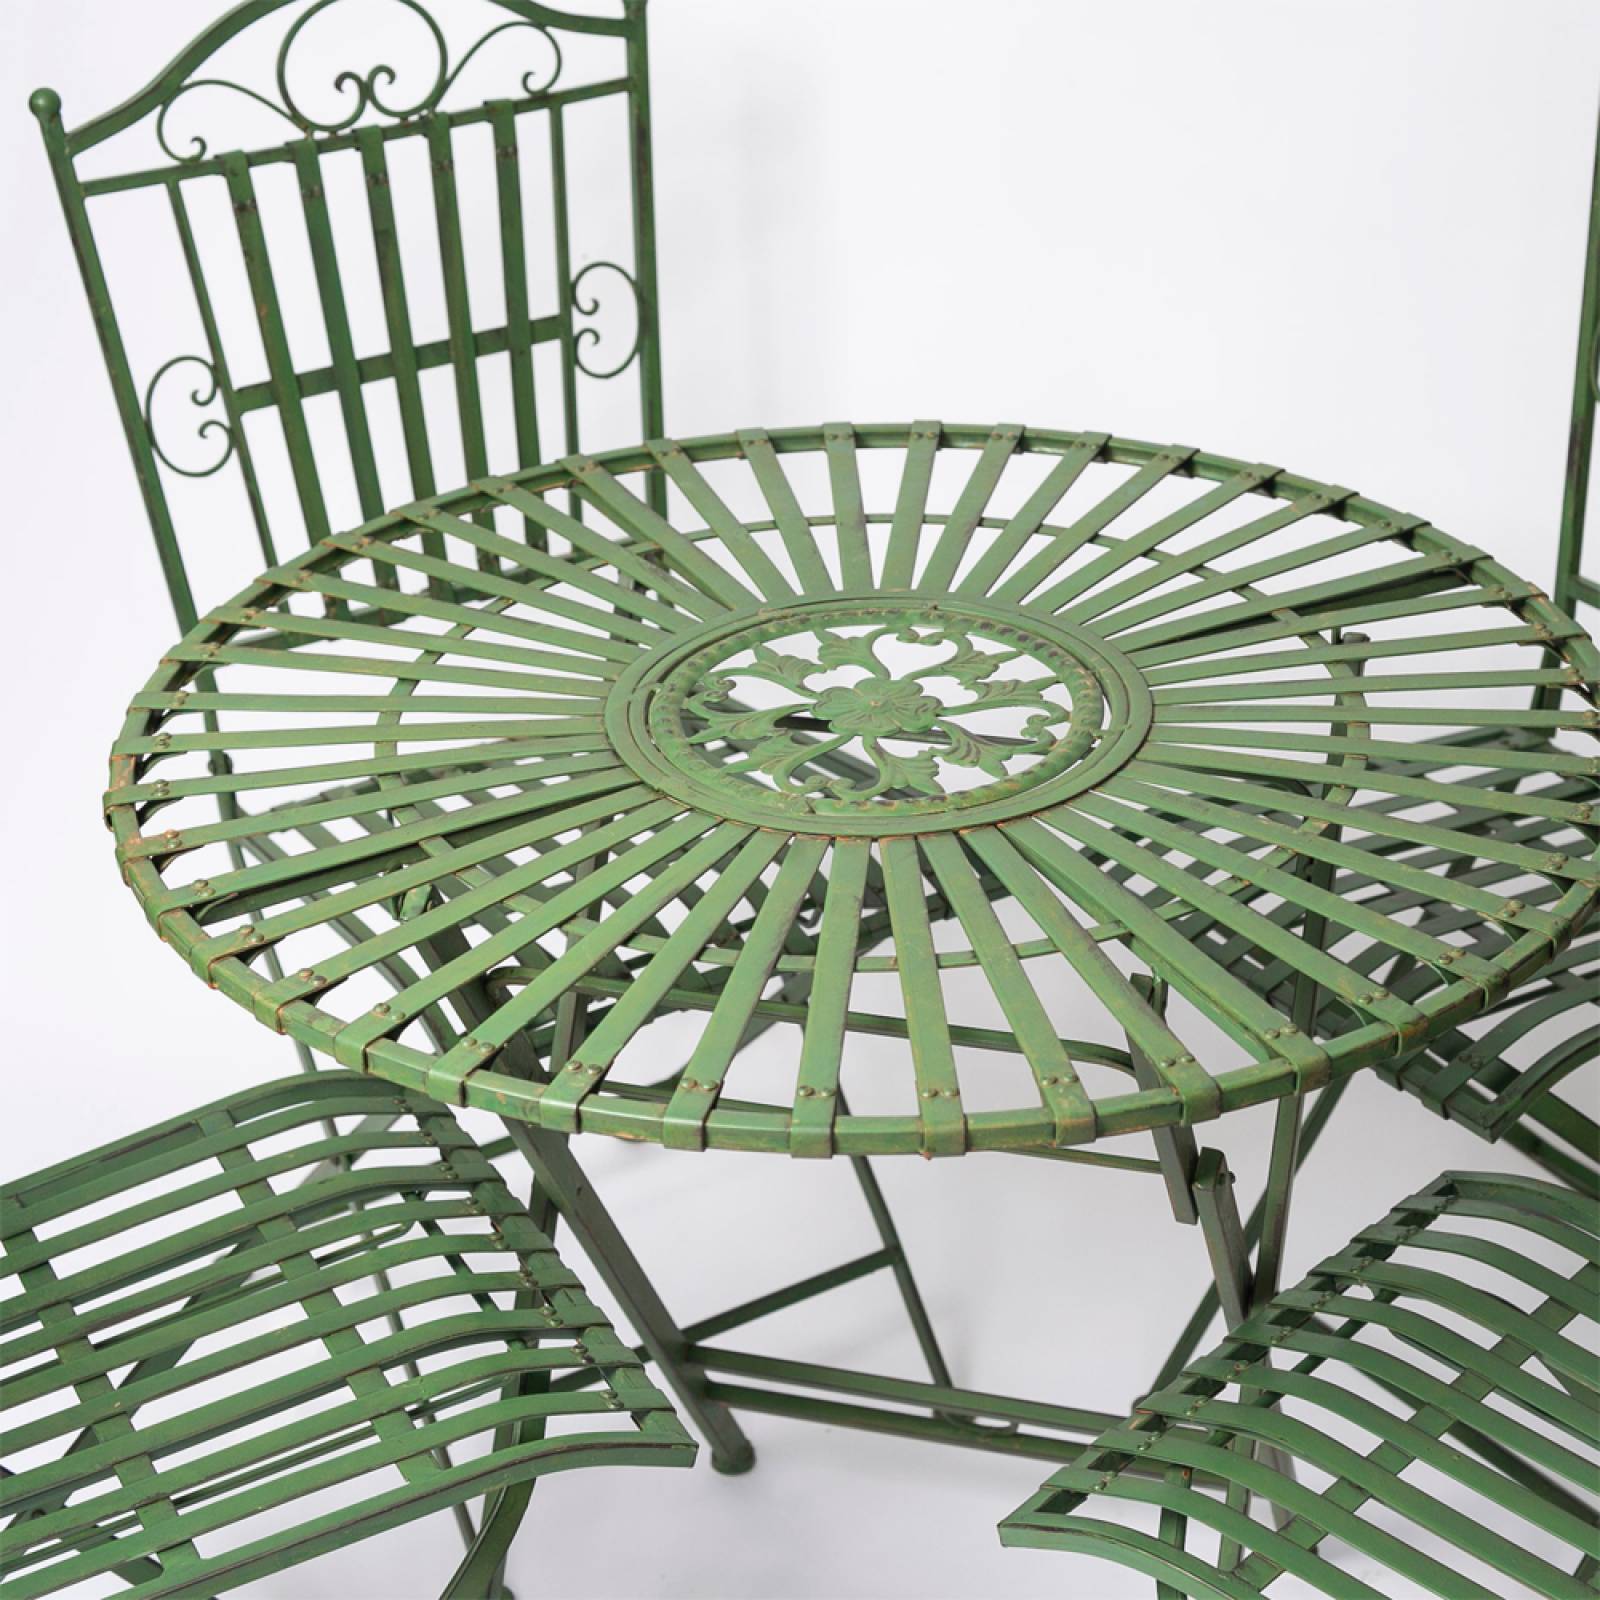 Set Of Metal Garden Table & 4 Chairs In Antique Green thumbnails